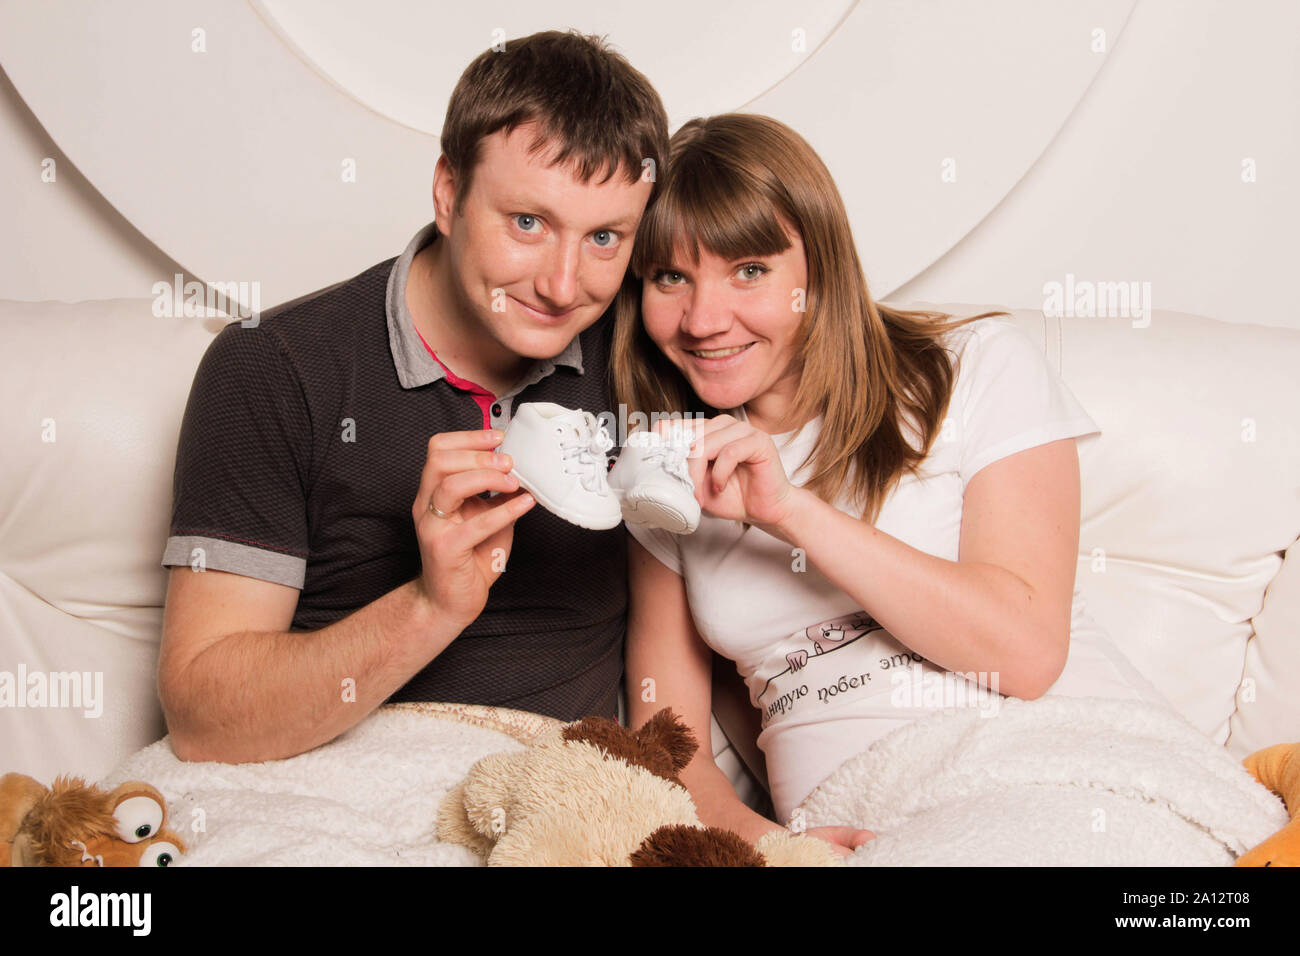 Zaporizhia, Ukraine - April 5, 2012: Portrait of happy future parents. The pregnant woman and the future father are holding little baby shoes Stock Photo